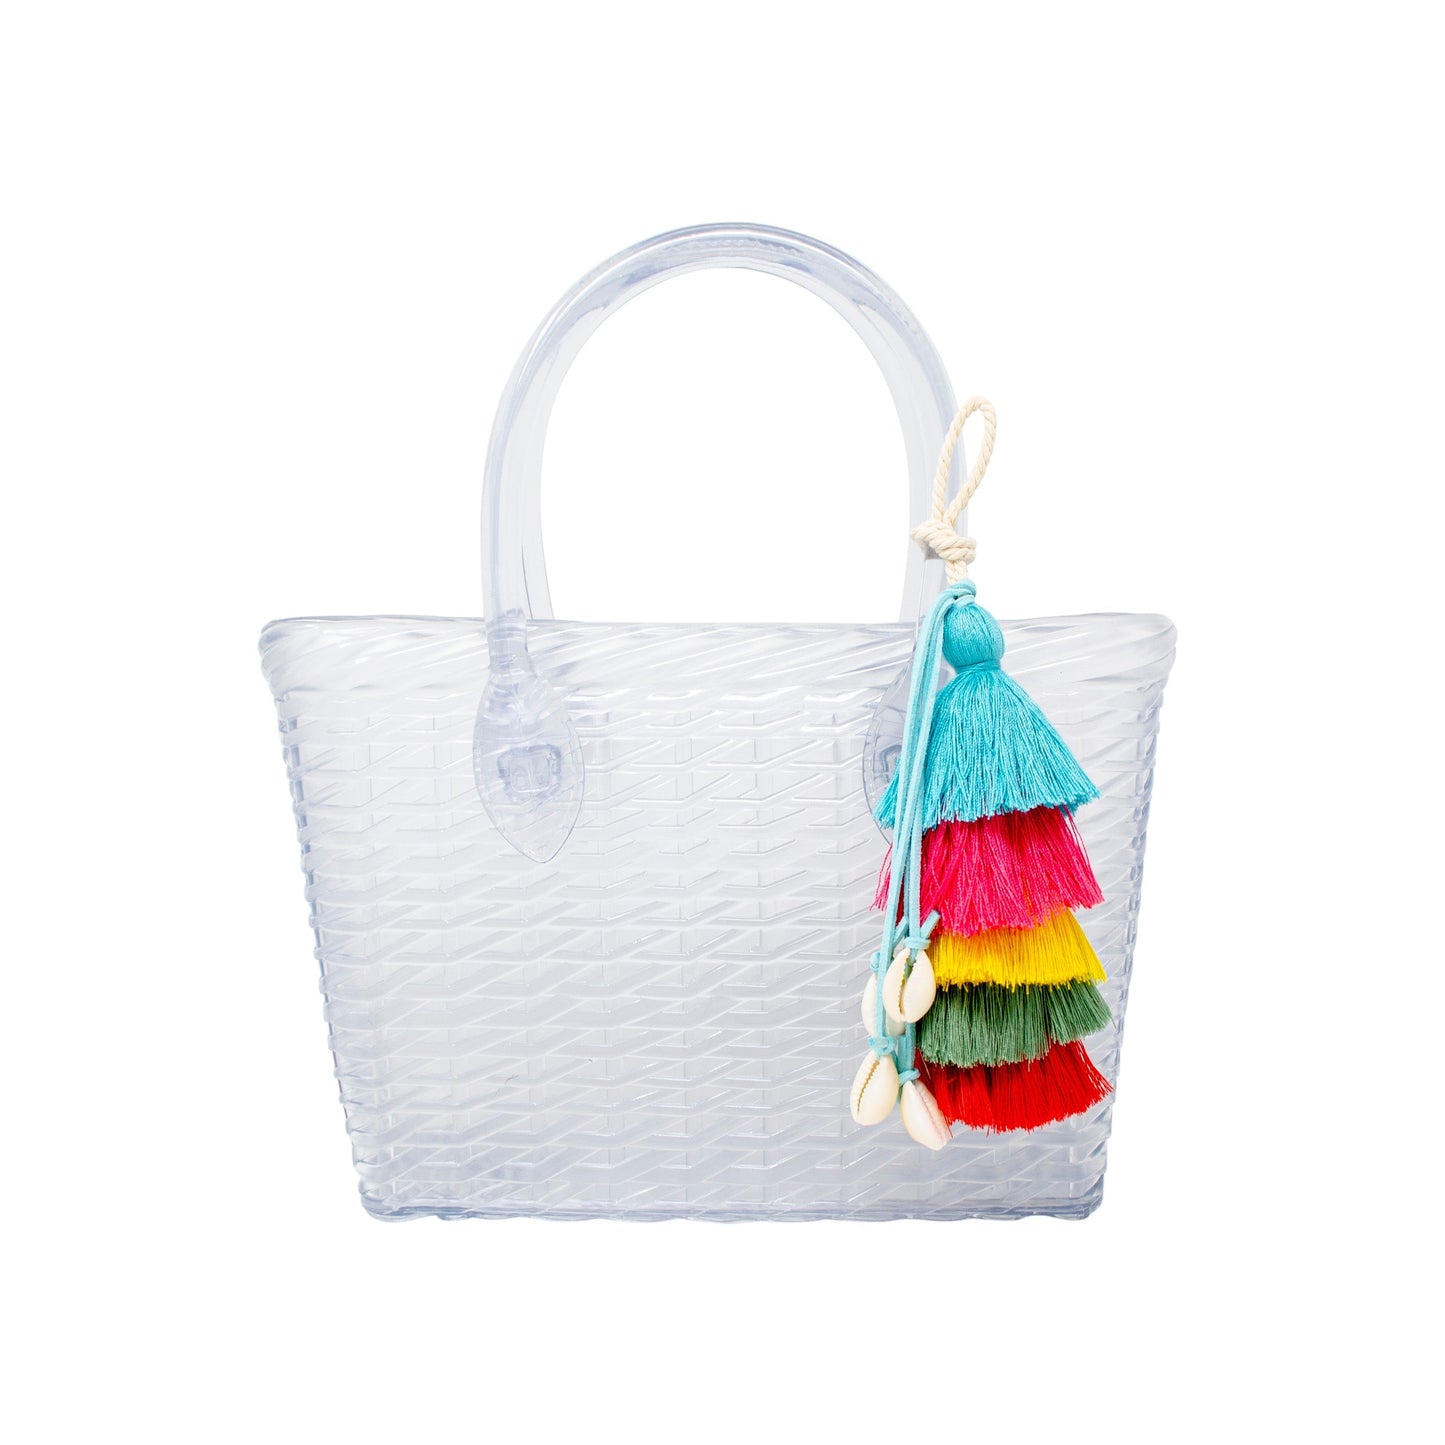 Girl's Tiny Jelly Weave Tote Bag